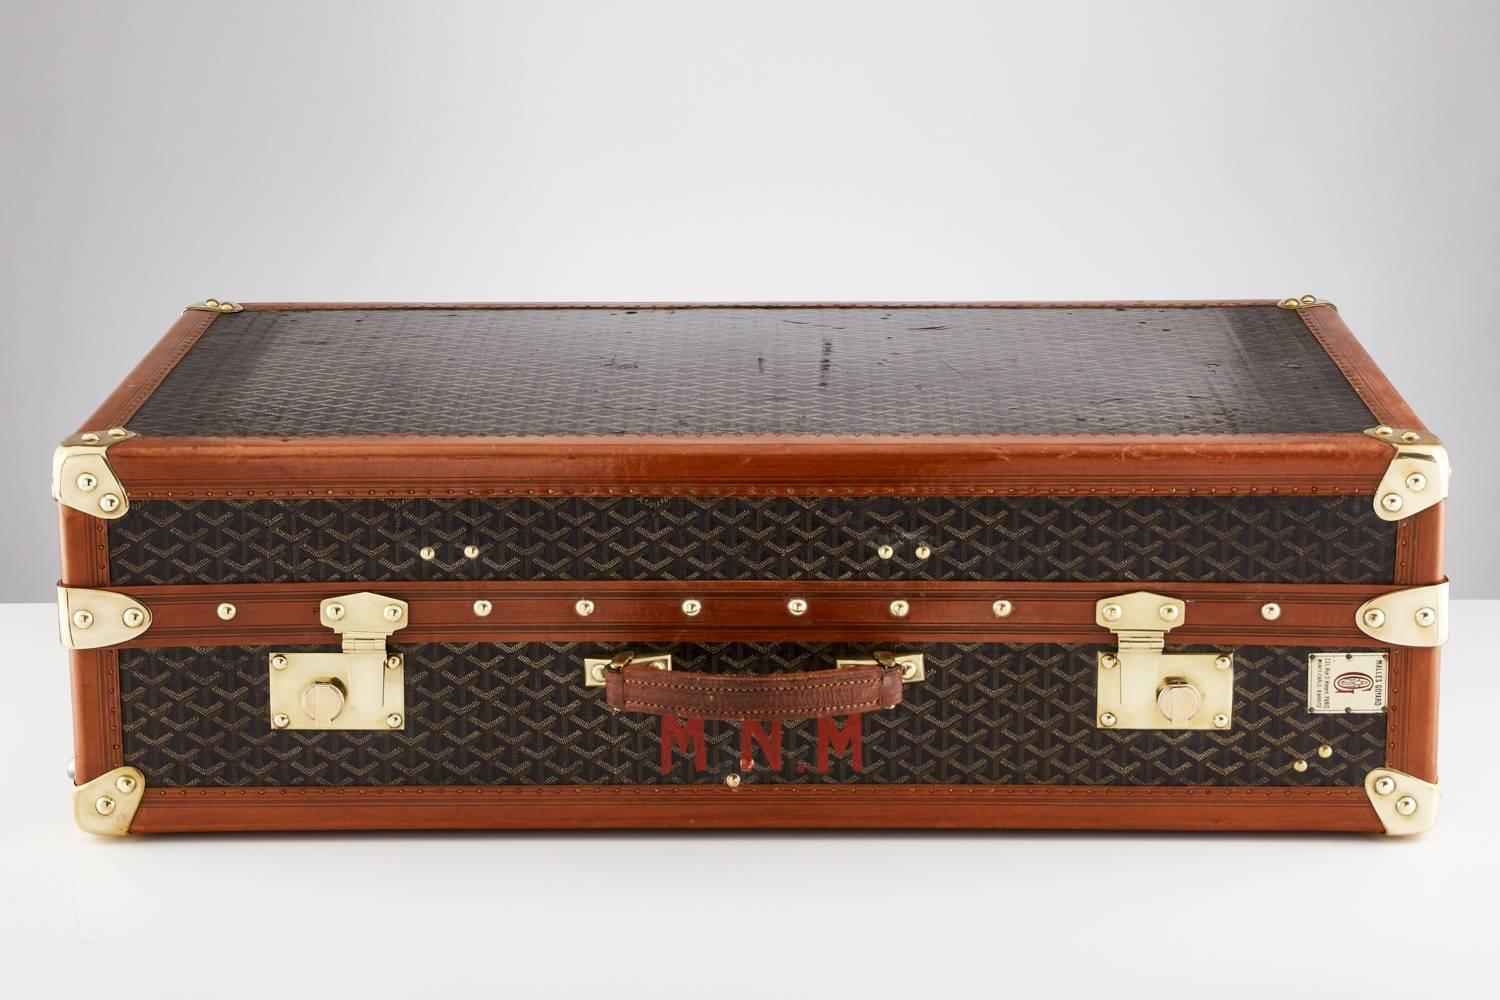 A 20th century vintage Goyard wardrobe trunk , circa 1930-1935.
This piece of beautiful luggage is signed through out. 
The hardware especially the locks are superb quality. 
The interior has drawers, with the words Goyard embroidered on the